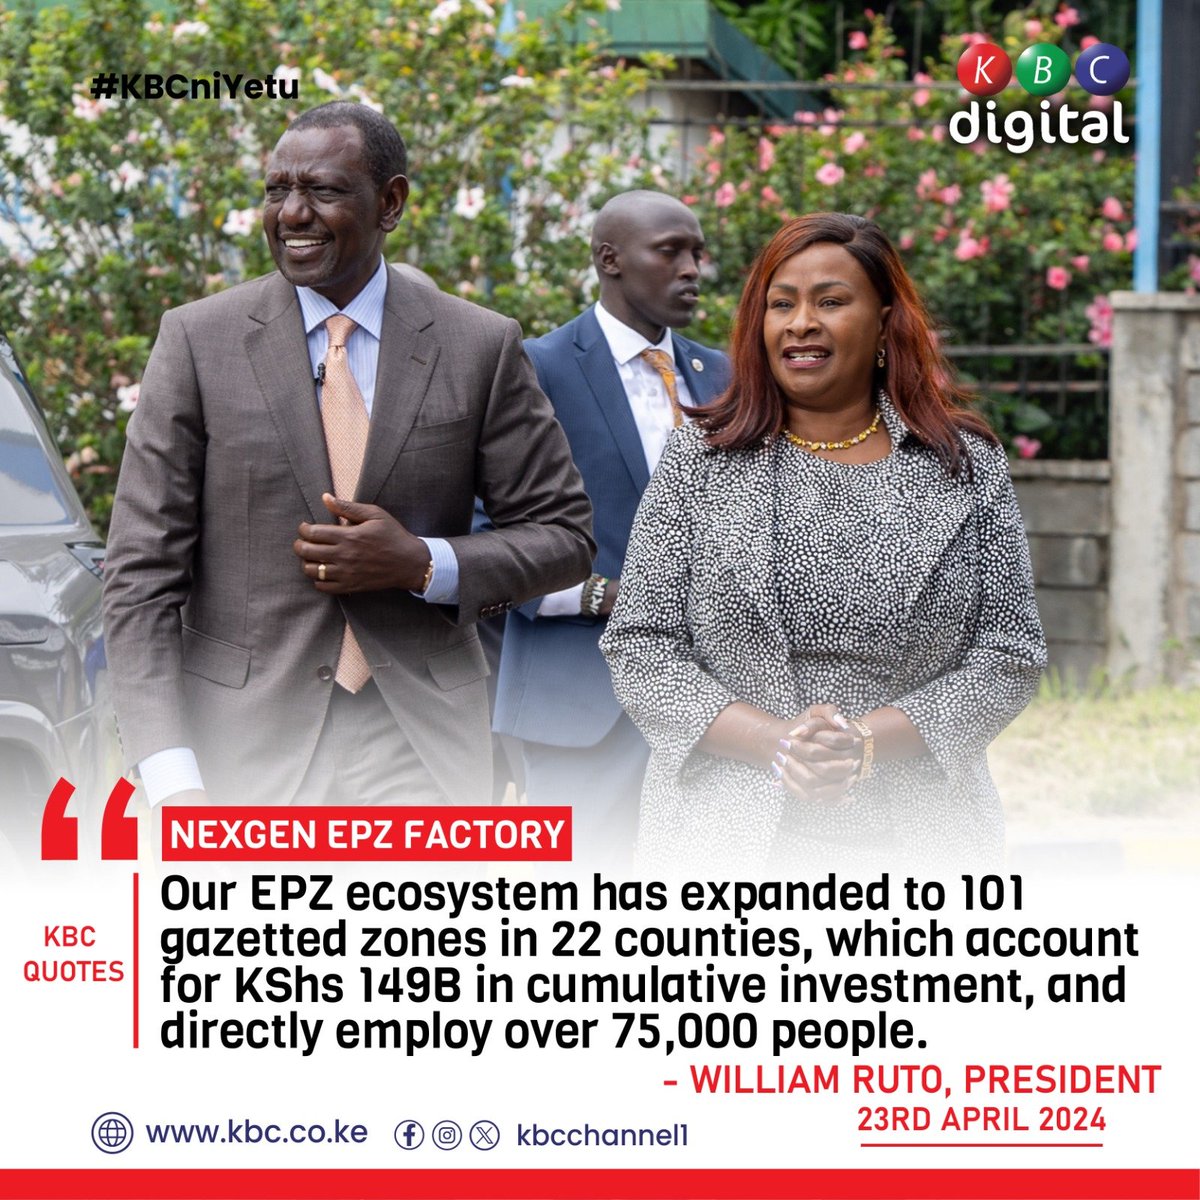 ‘Our EPZ ecosystem has expanded to 101 gazetted zones in 22 counties, which account for KShs 149B in cumulative investment, and directly employ over 75,000 people.' - William Ruto, President #KBCniYetu ^RO